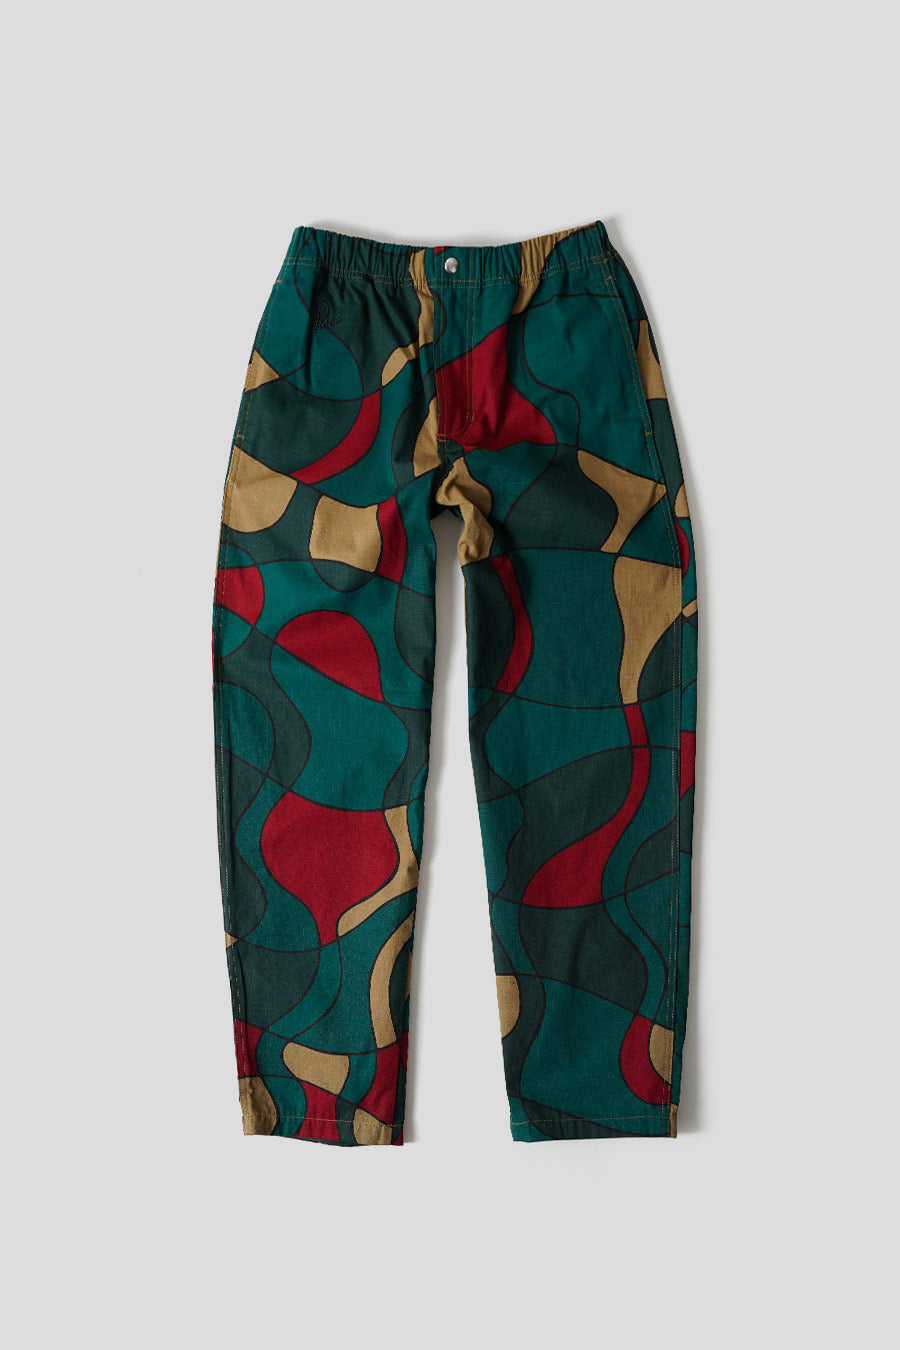 BY PARRA - CASUAL TROUSERS - LE LABO STORE